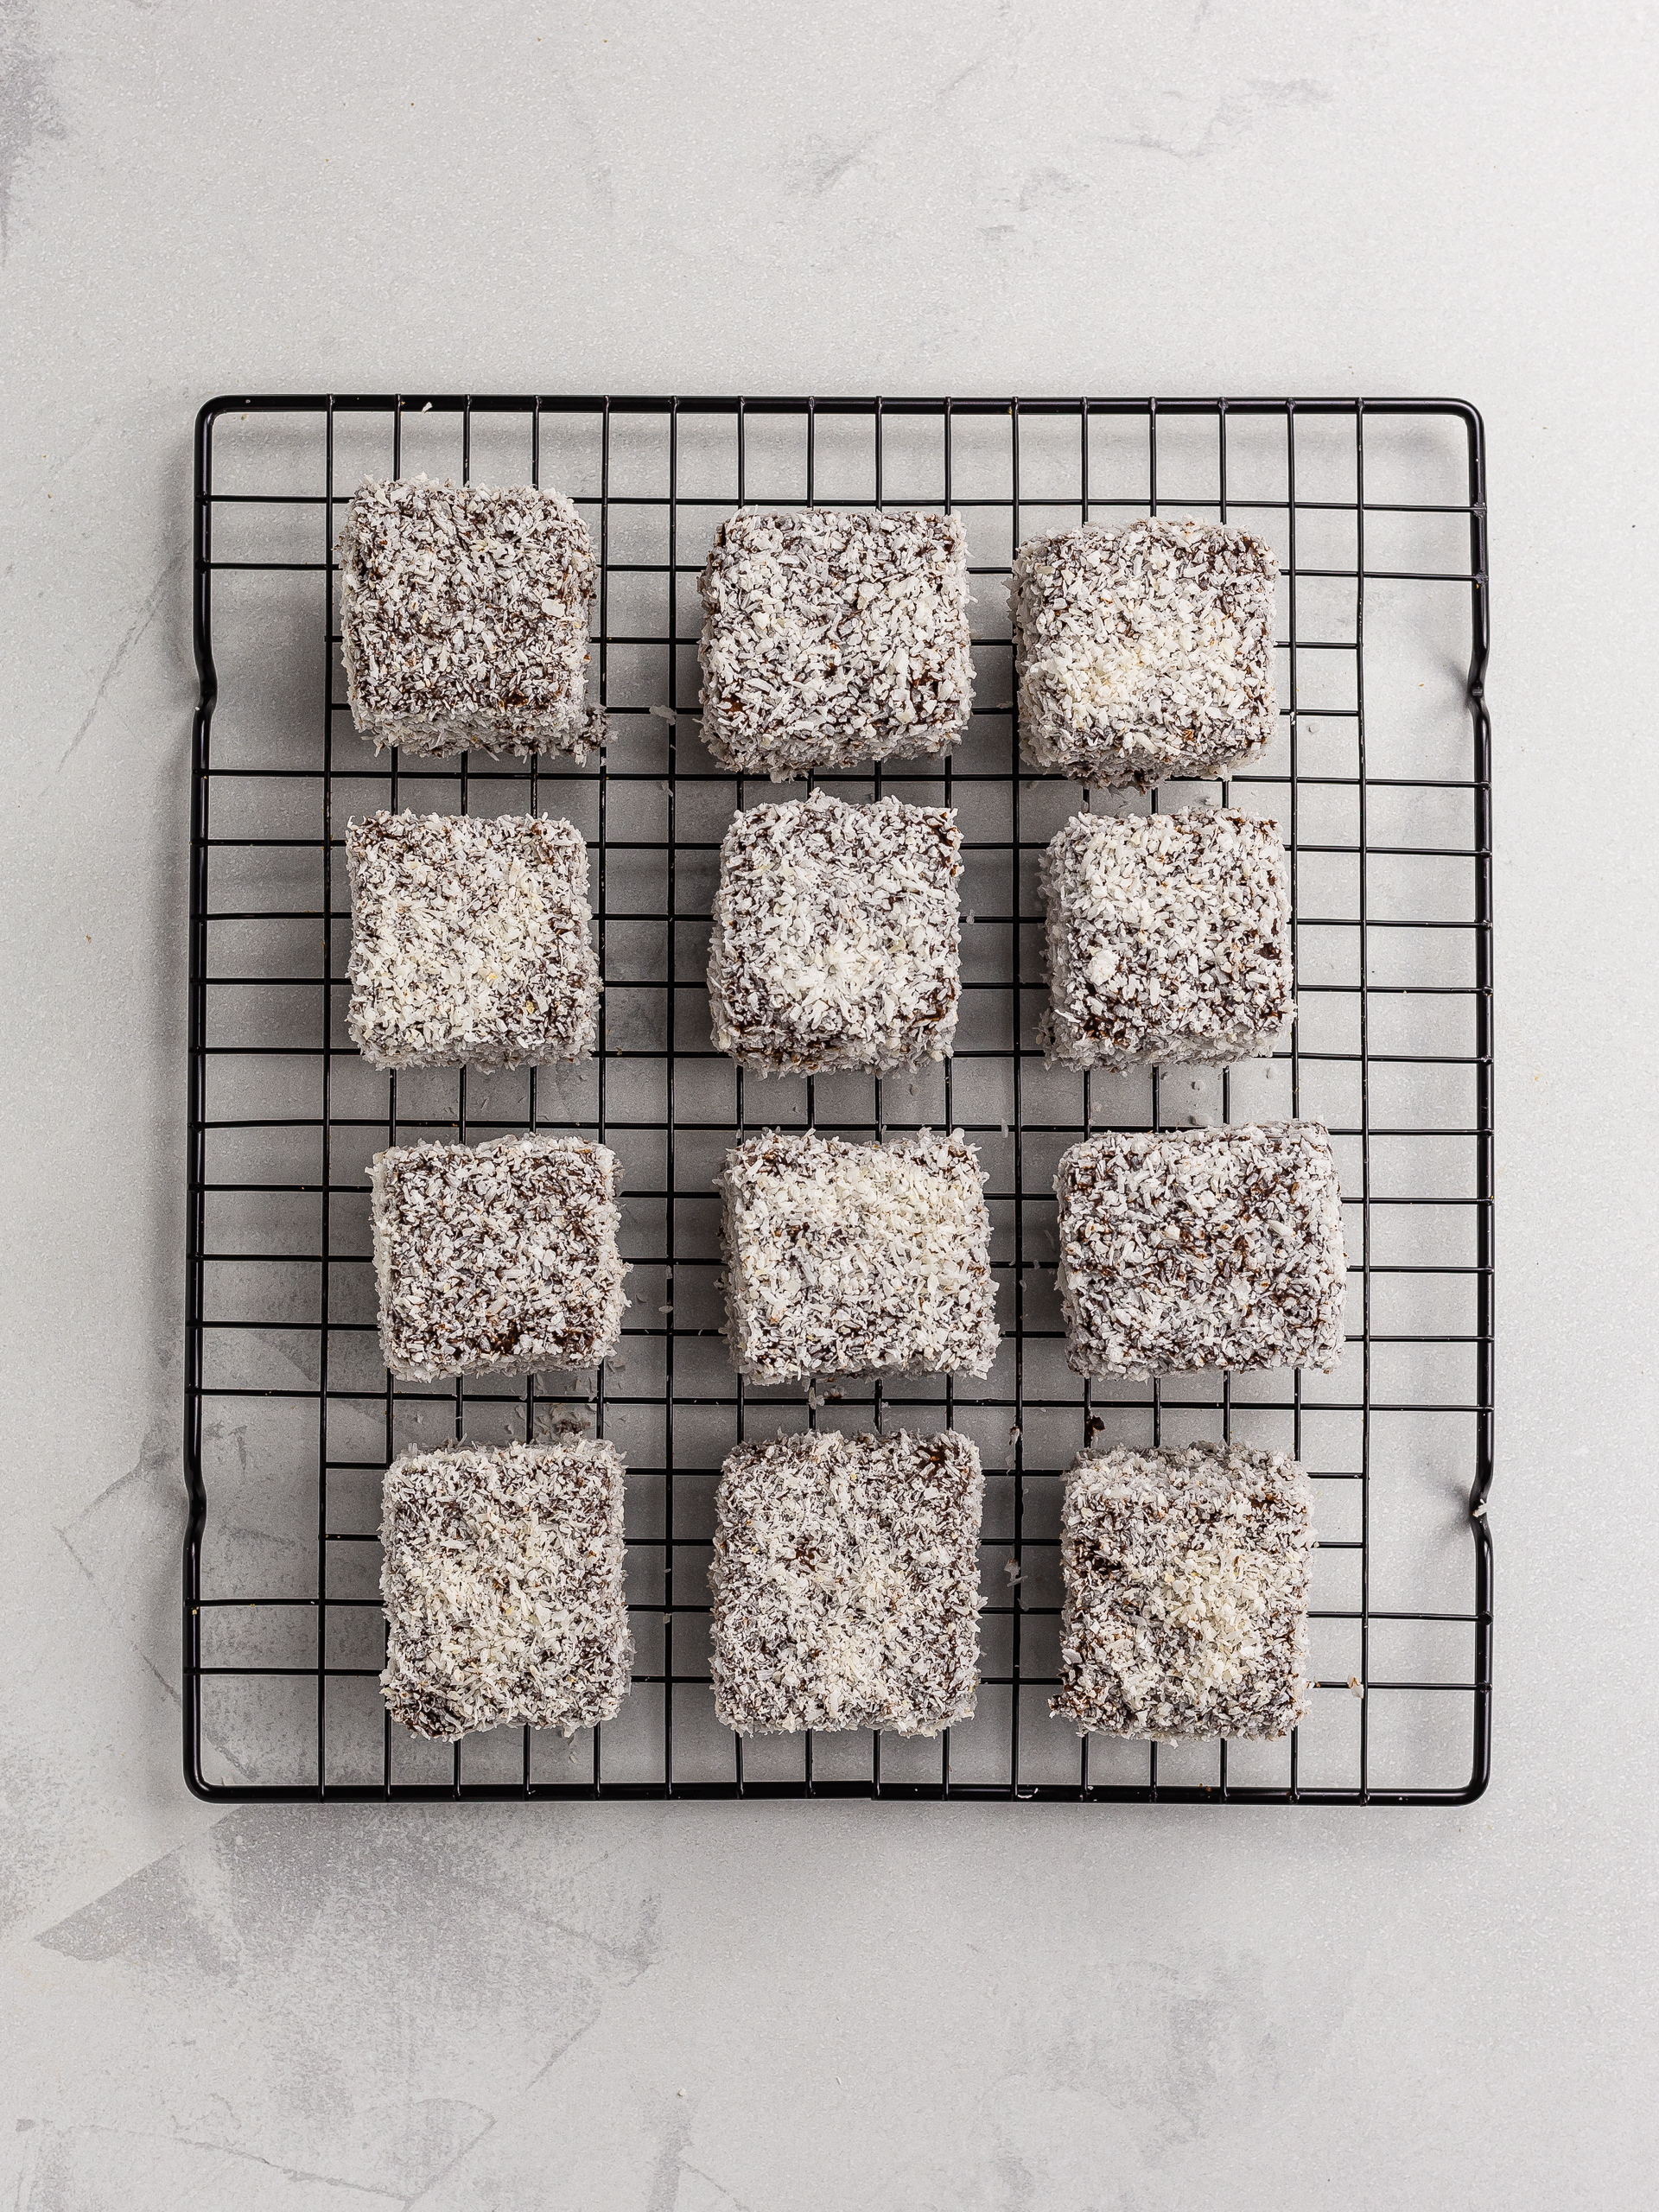 coconut and chocolate coated lamingtons